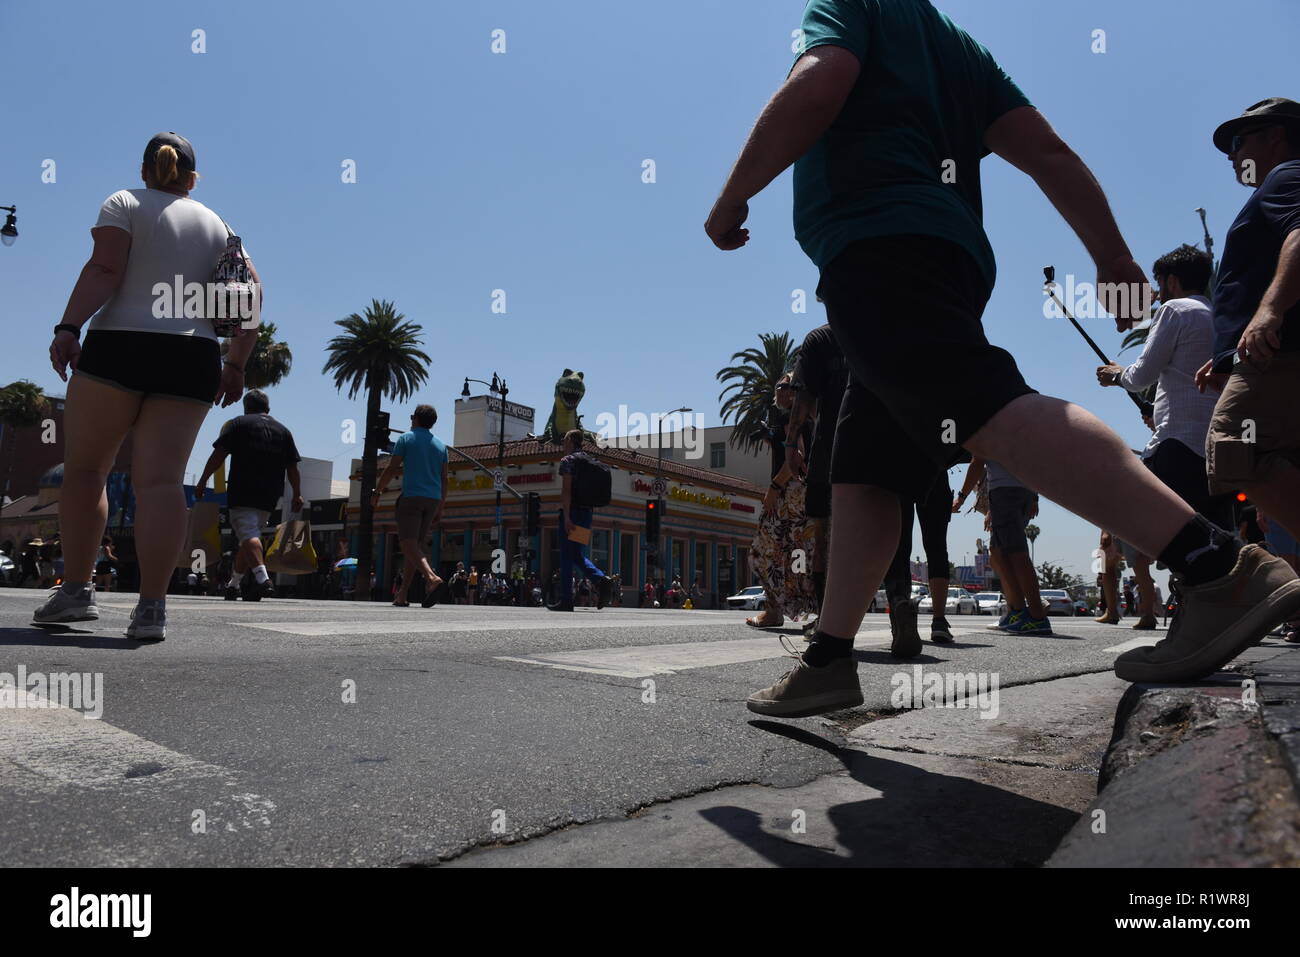 HOLLYWOOD - August 7, 2018: People crossing the road from low angle point of view on Hollywood blvd in Hollywood, CA. Stock Photo